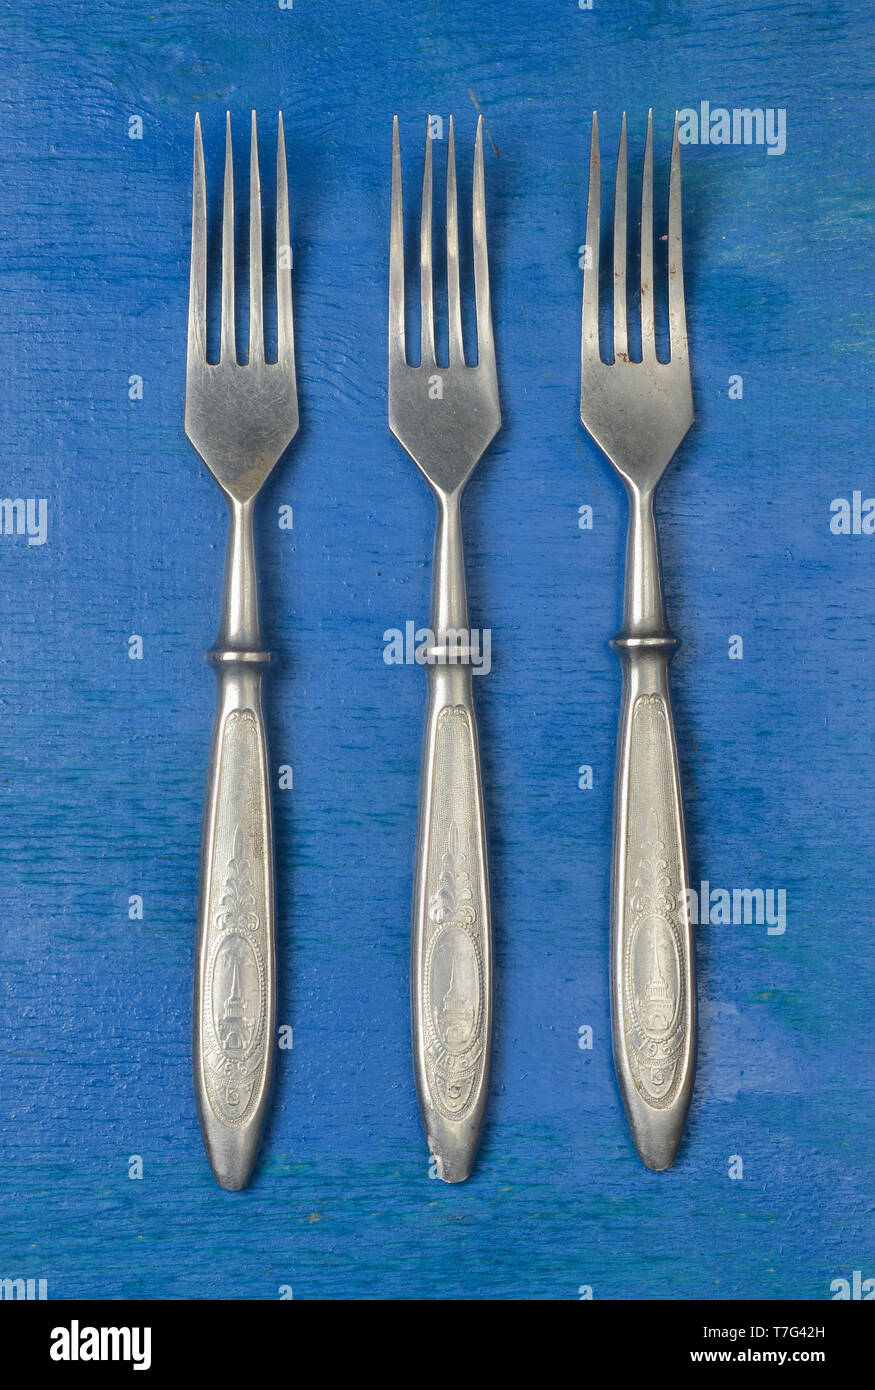 A set of forks on a blue wooden surface. Top view. Stock Photo